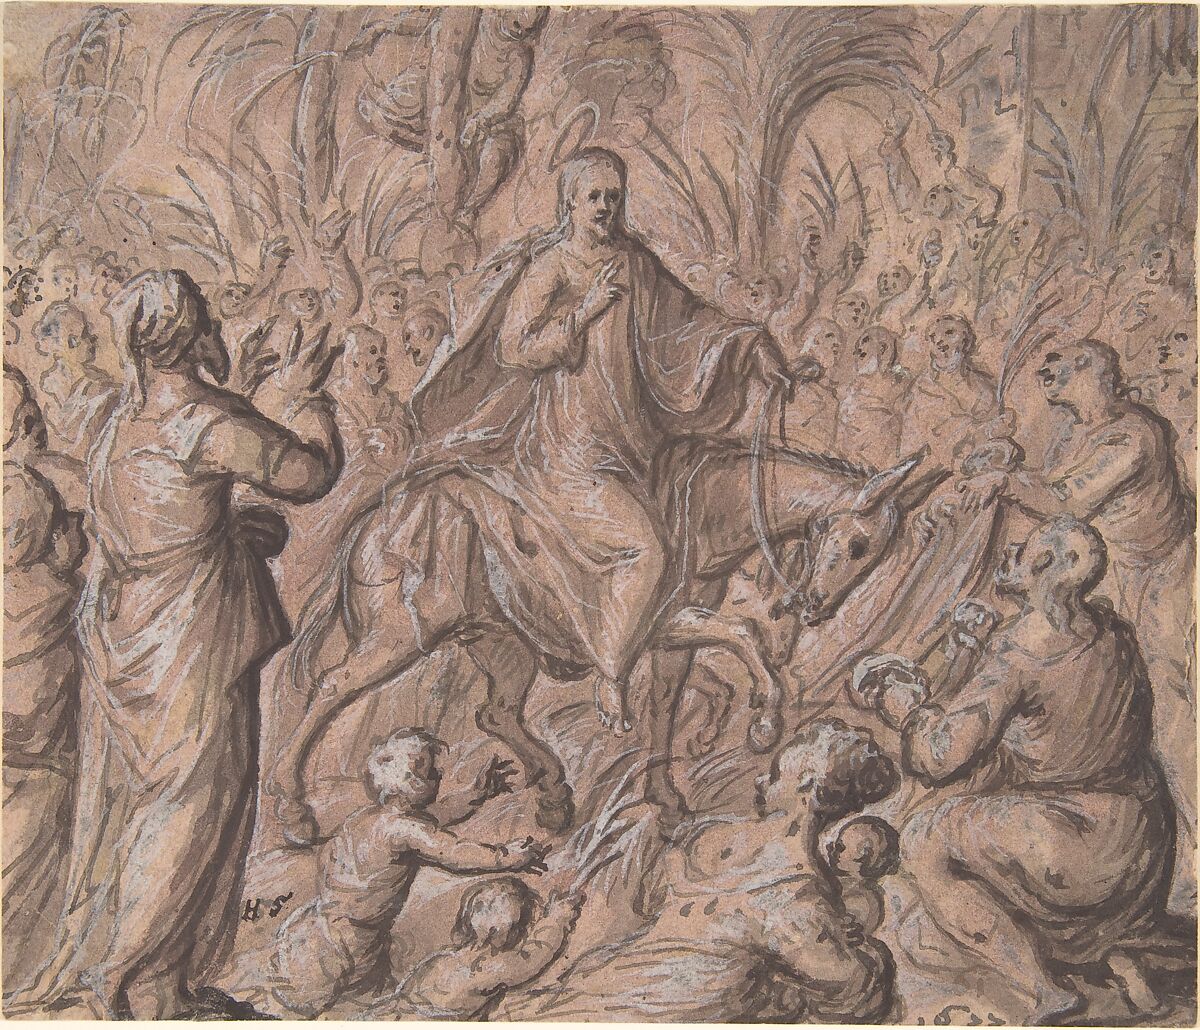 Christ's Entry into Jerusalem, Hans Stutte (German, active Lübeck, died before 1625), Pen and brown ink, brown wash heightened with white on pinkish paper 